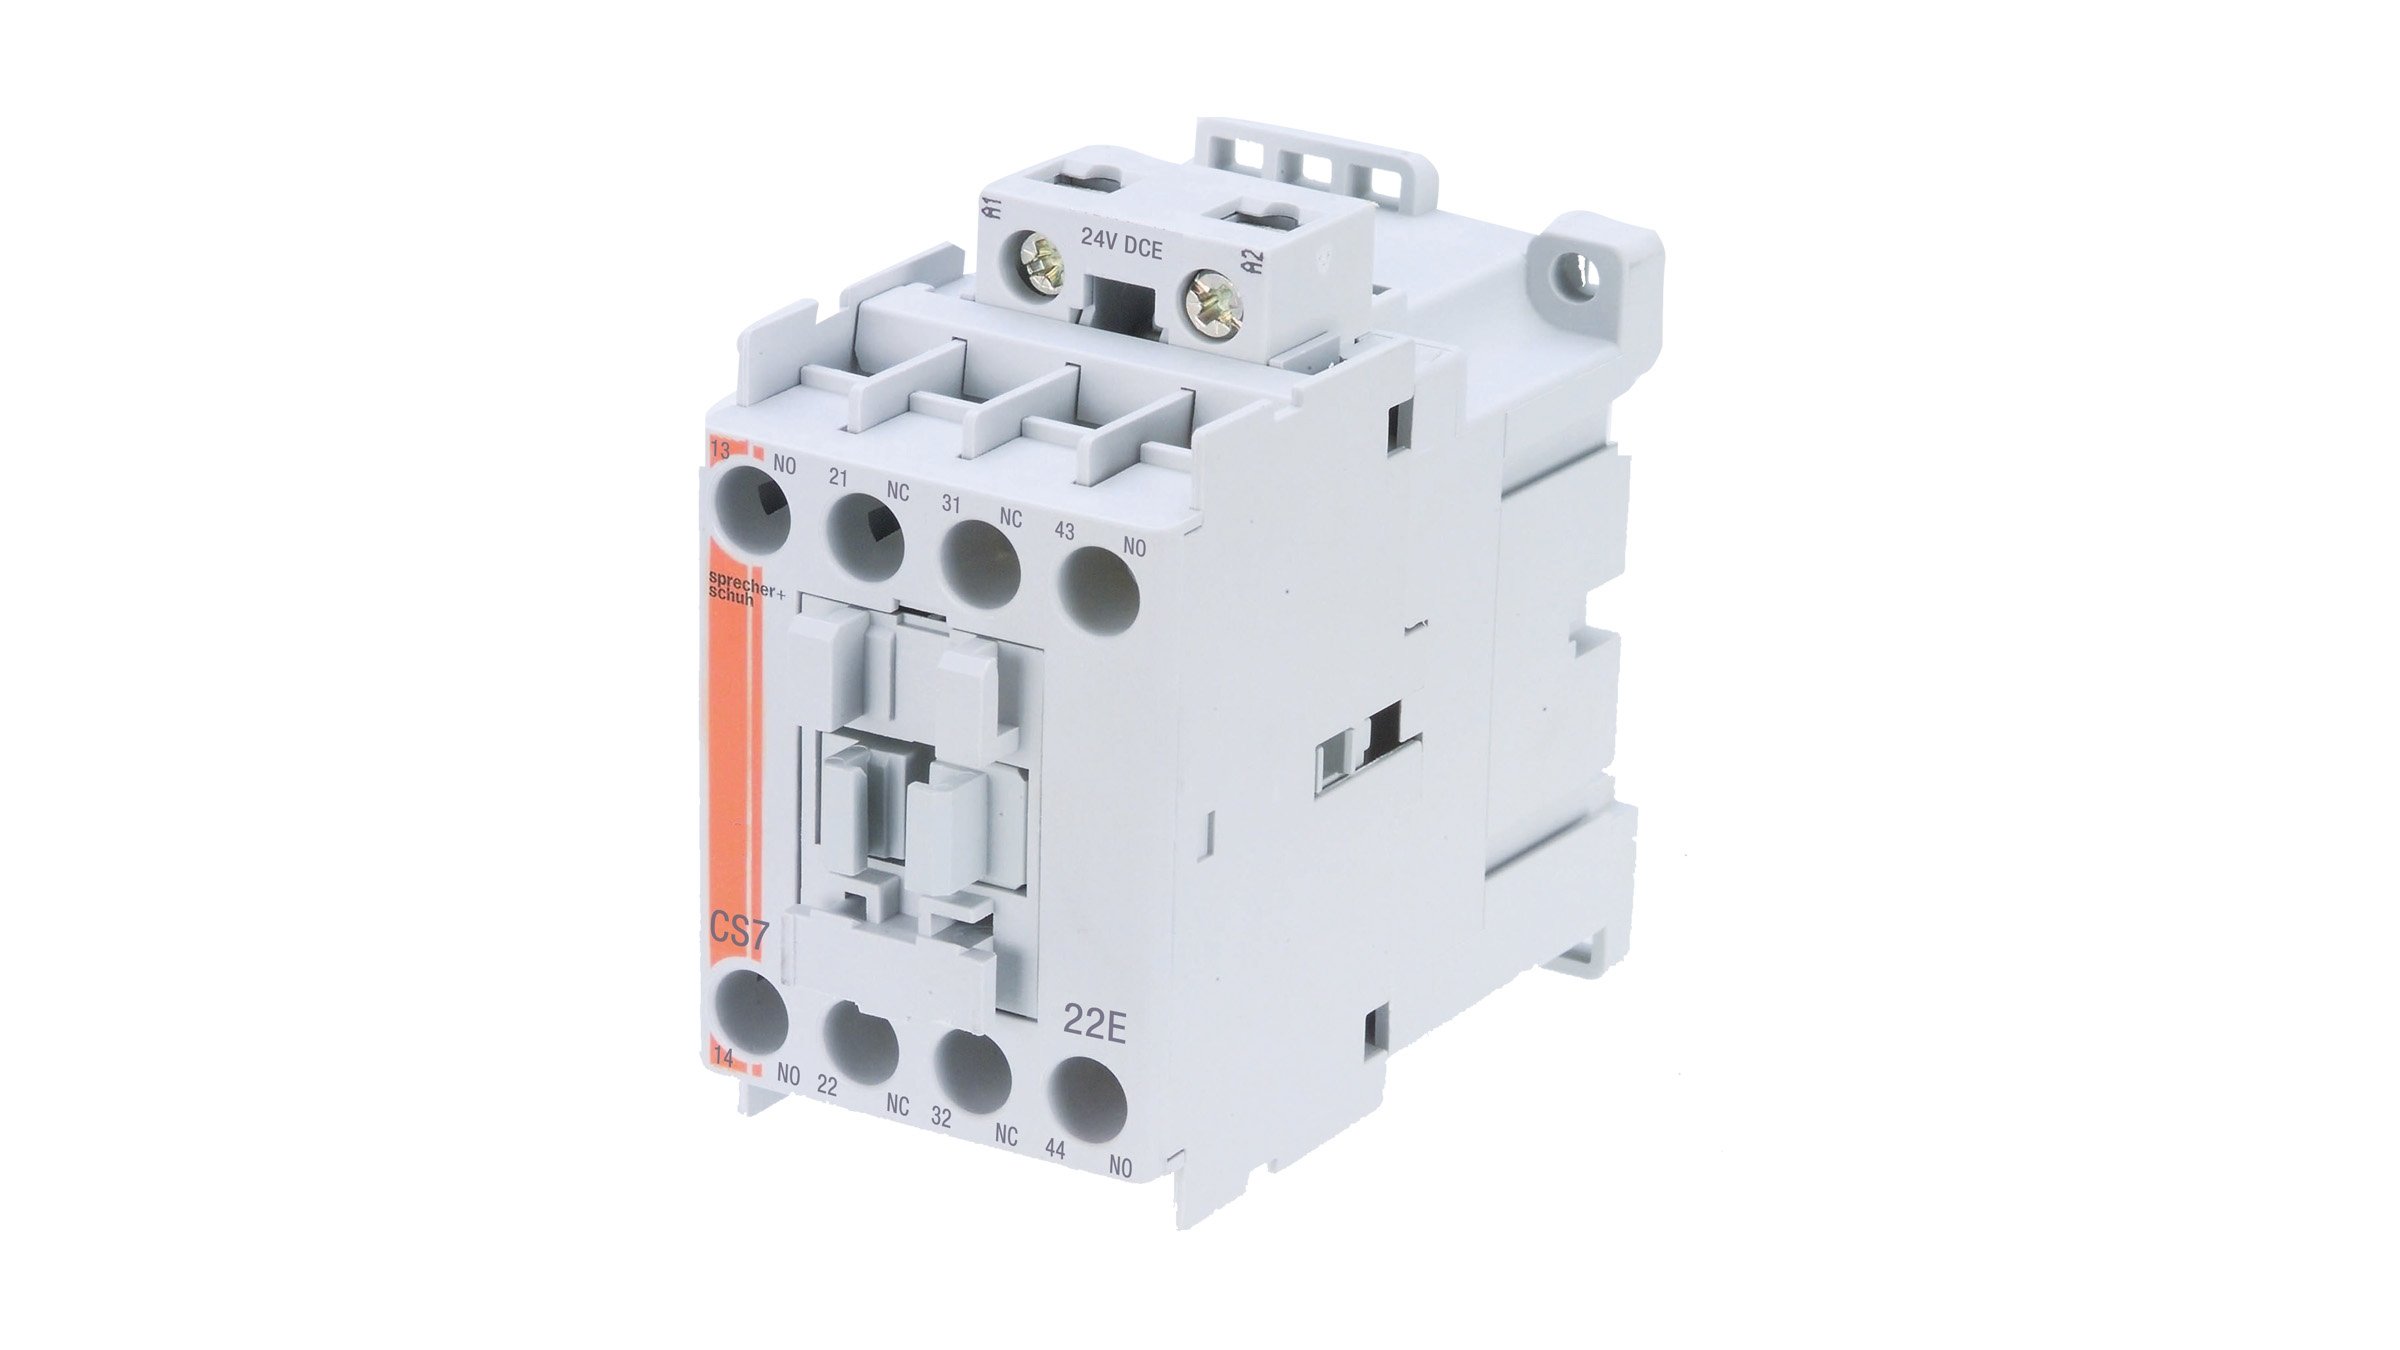 Reliable, general purpose relays for heavy duty applications